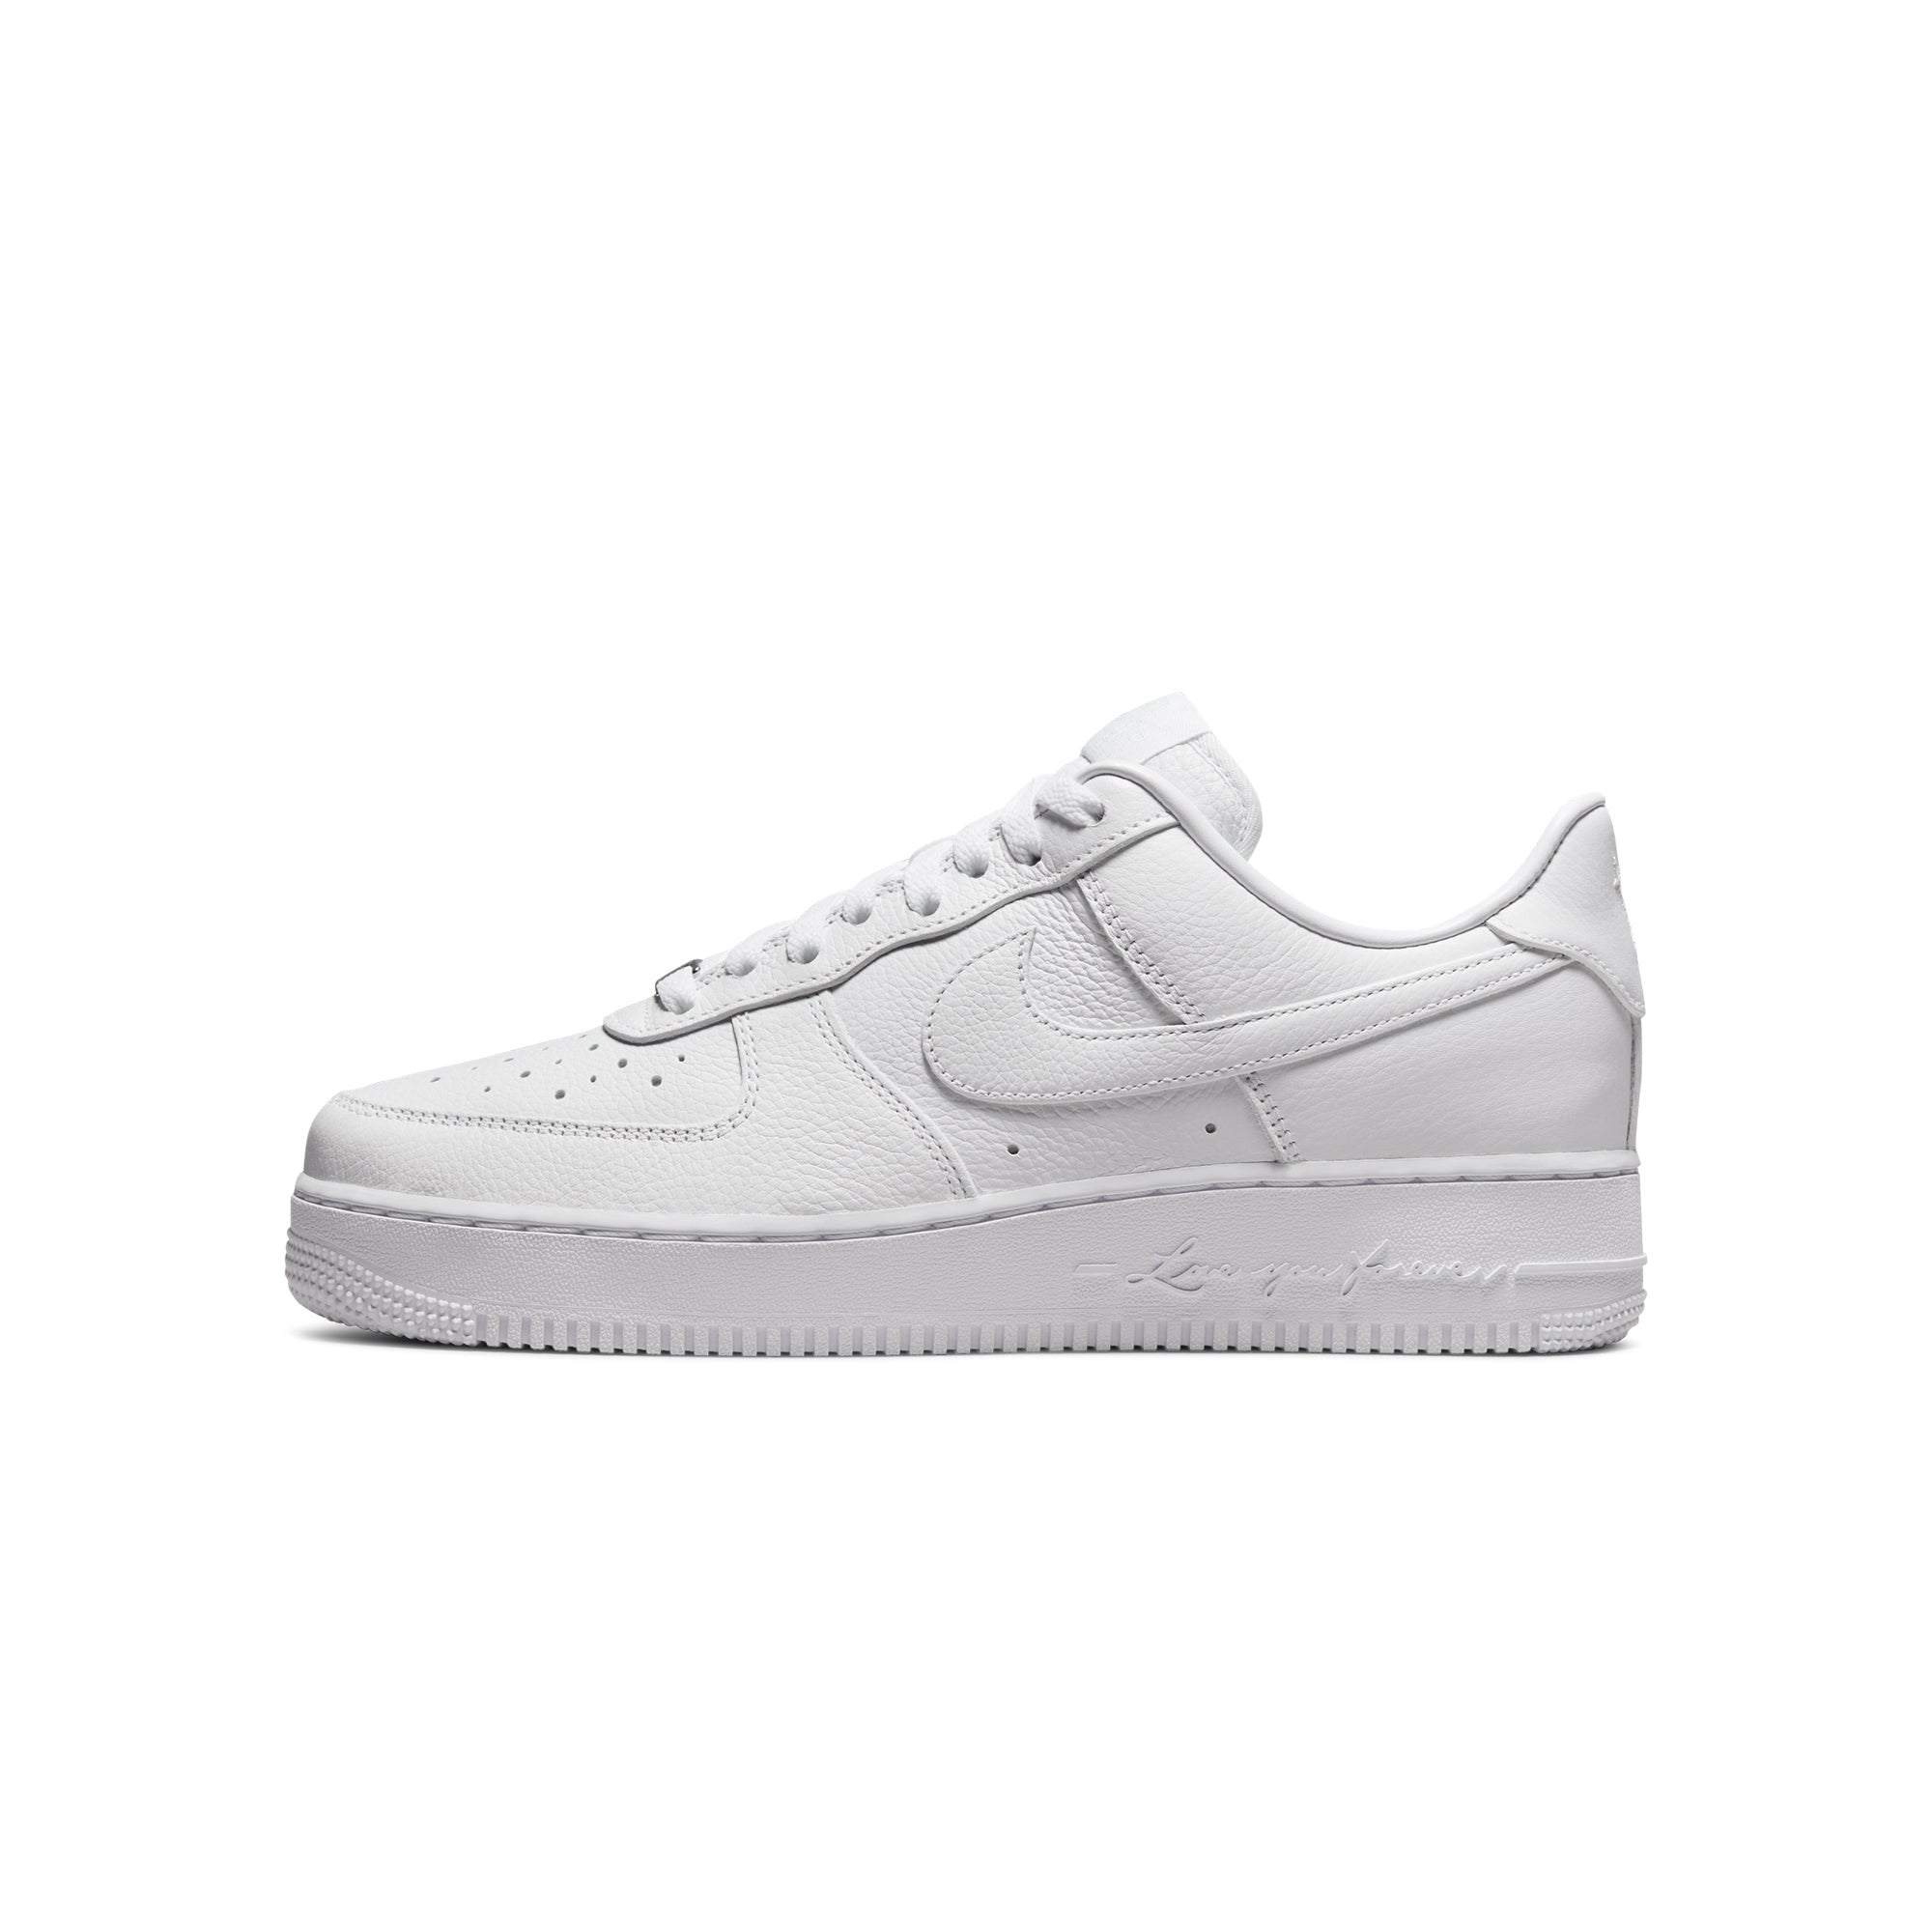 NOCTA Air Force 1 Low Shoes – Extra Butter